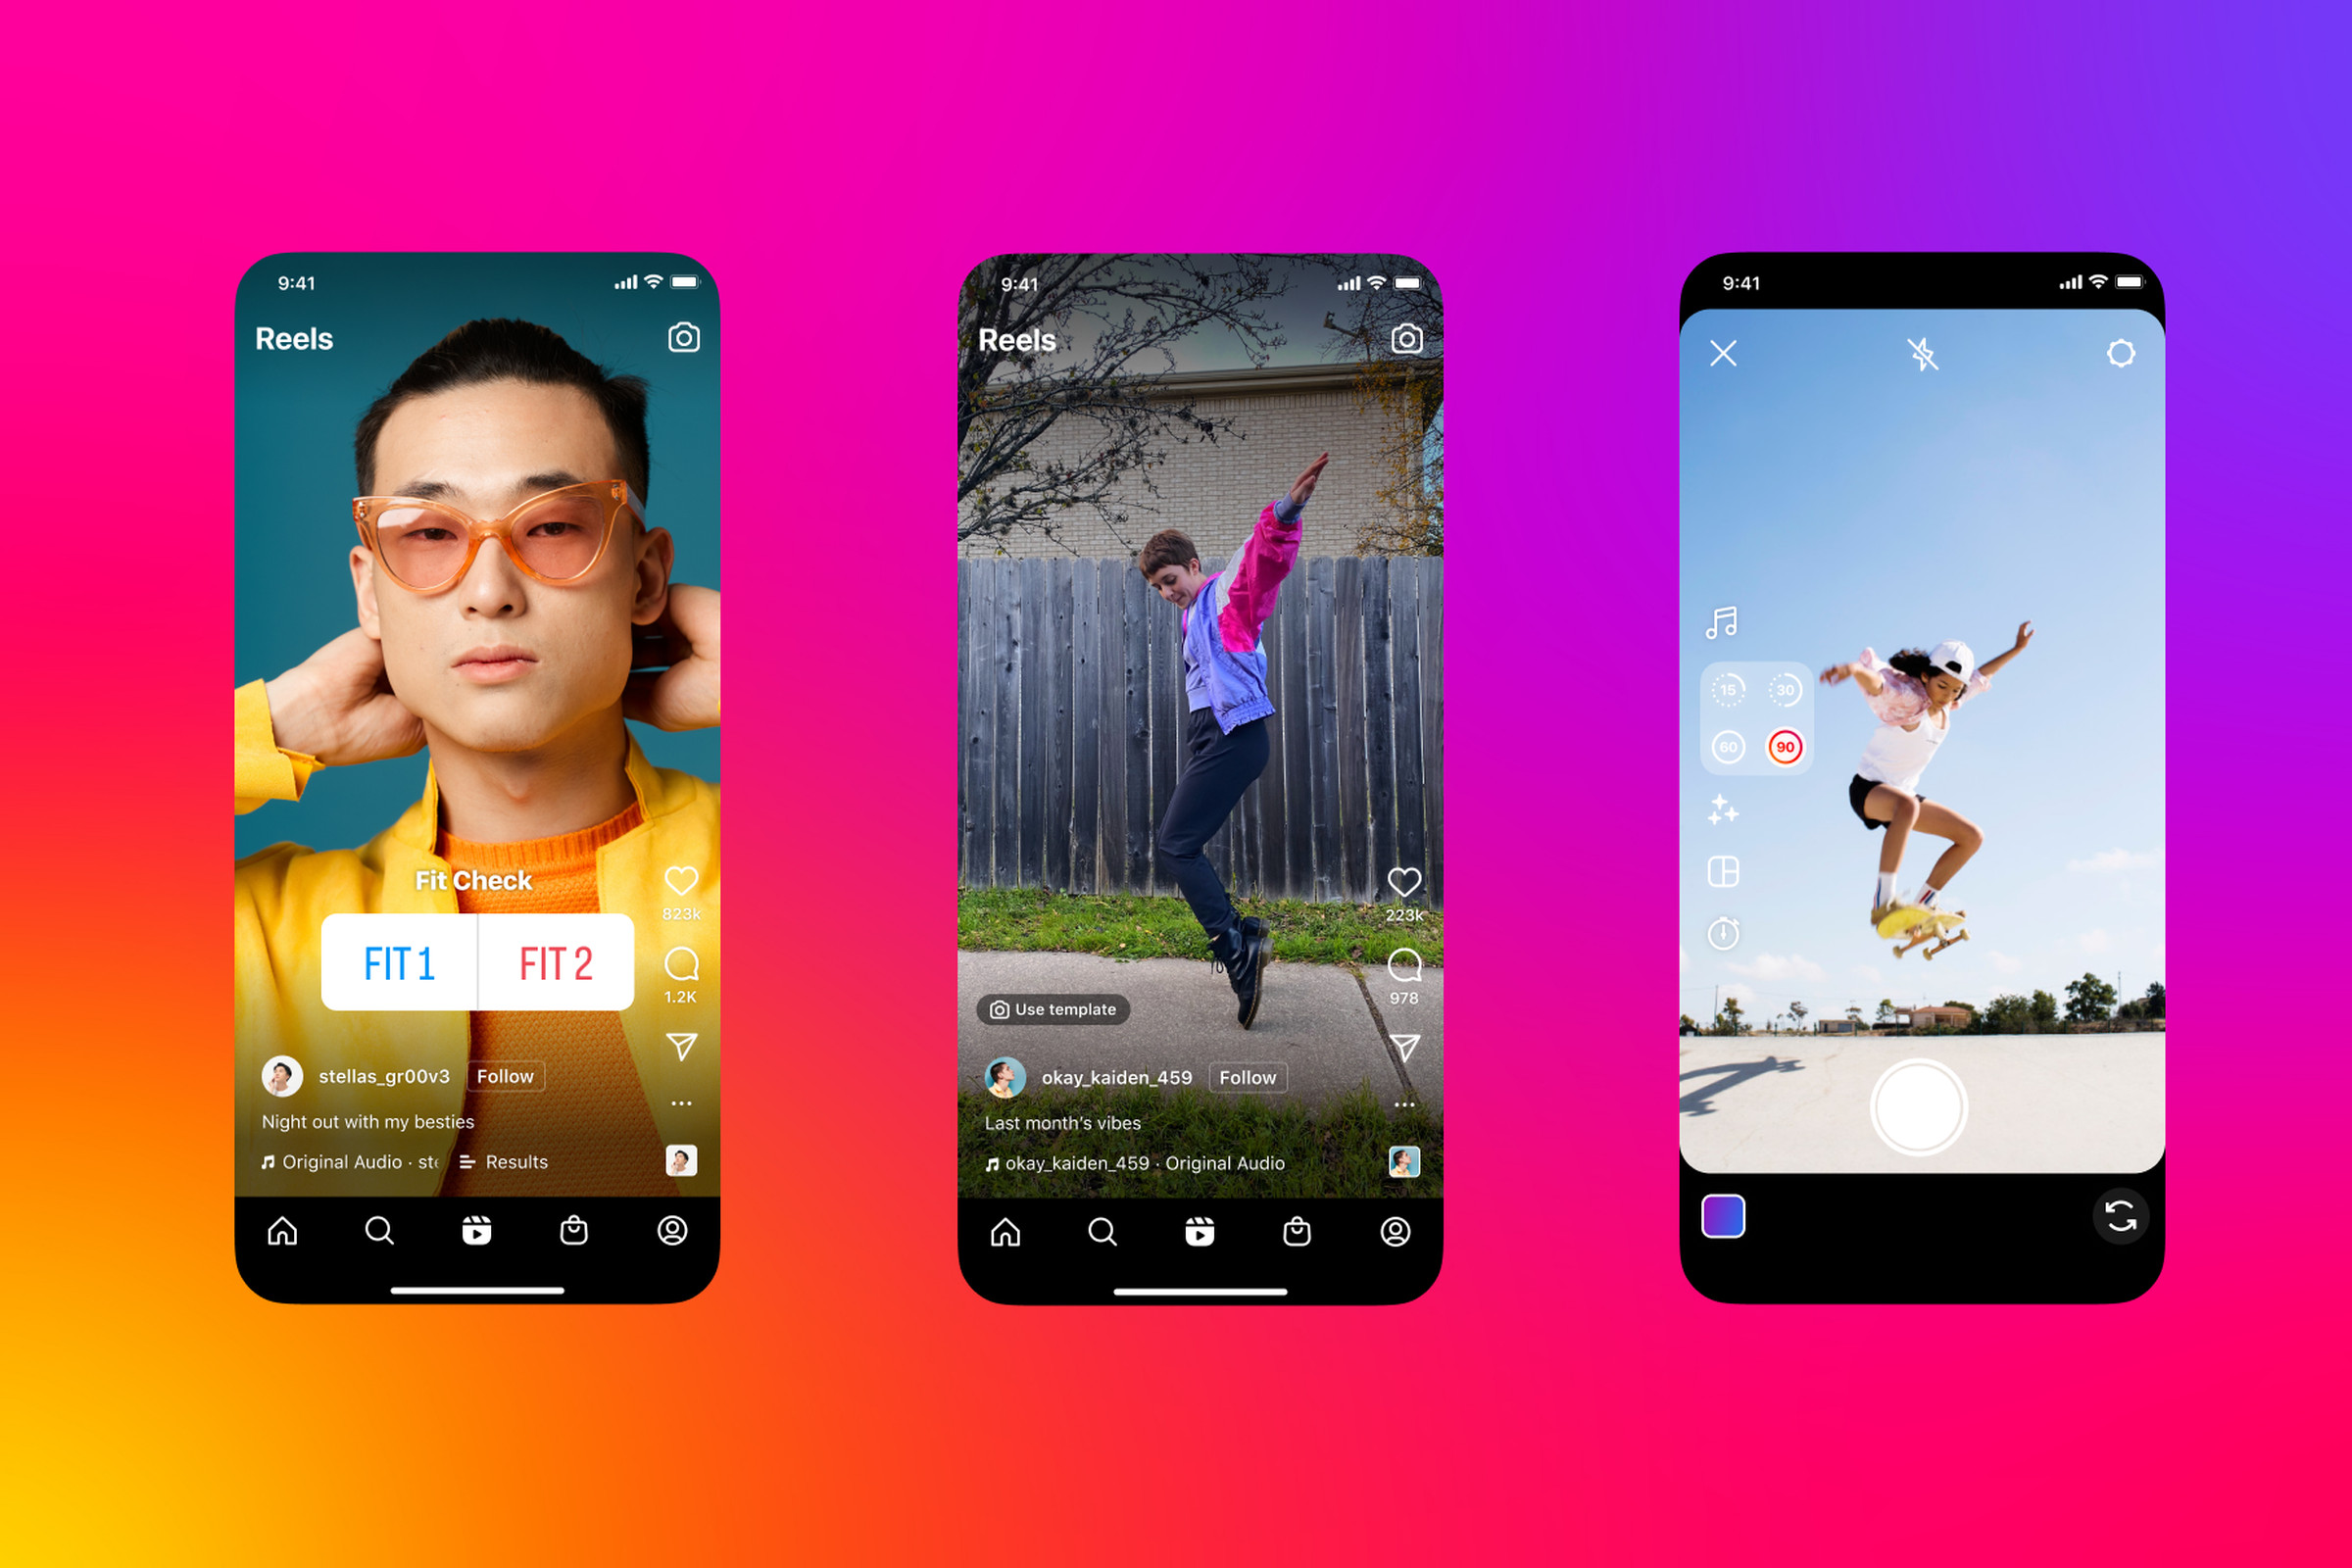 Instagram and Facebook Reels now supports 90-second videos